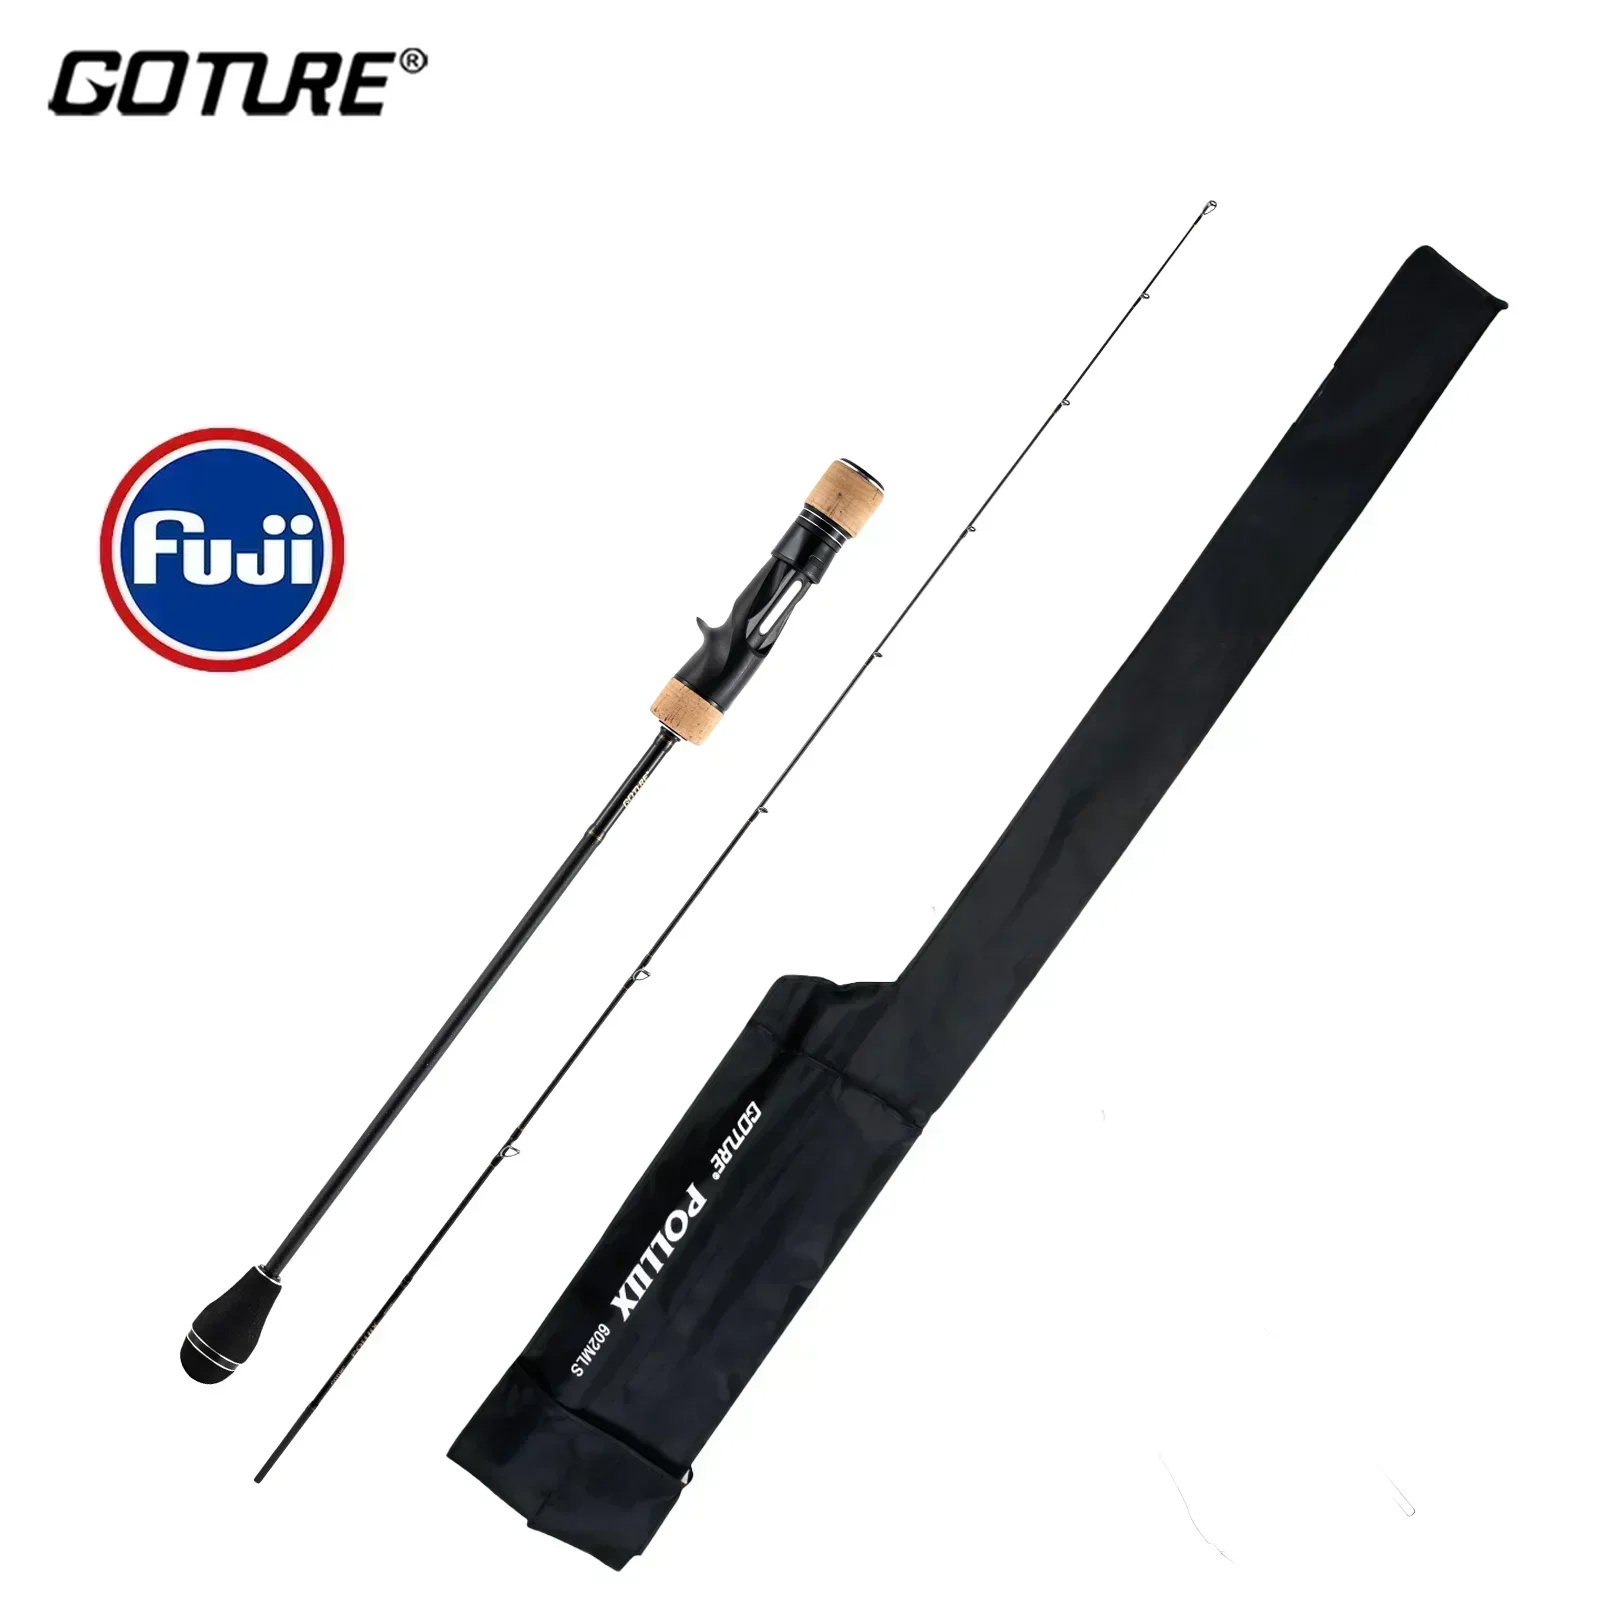 

Goture Pollux 1.83m 1.98m Slow Jigging Rod 100% Fuji Rings 2 Section Spinning Casting 30T Carbon Fiber Sea Pole ML M MH Power